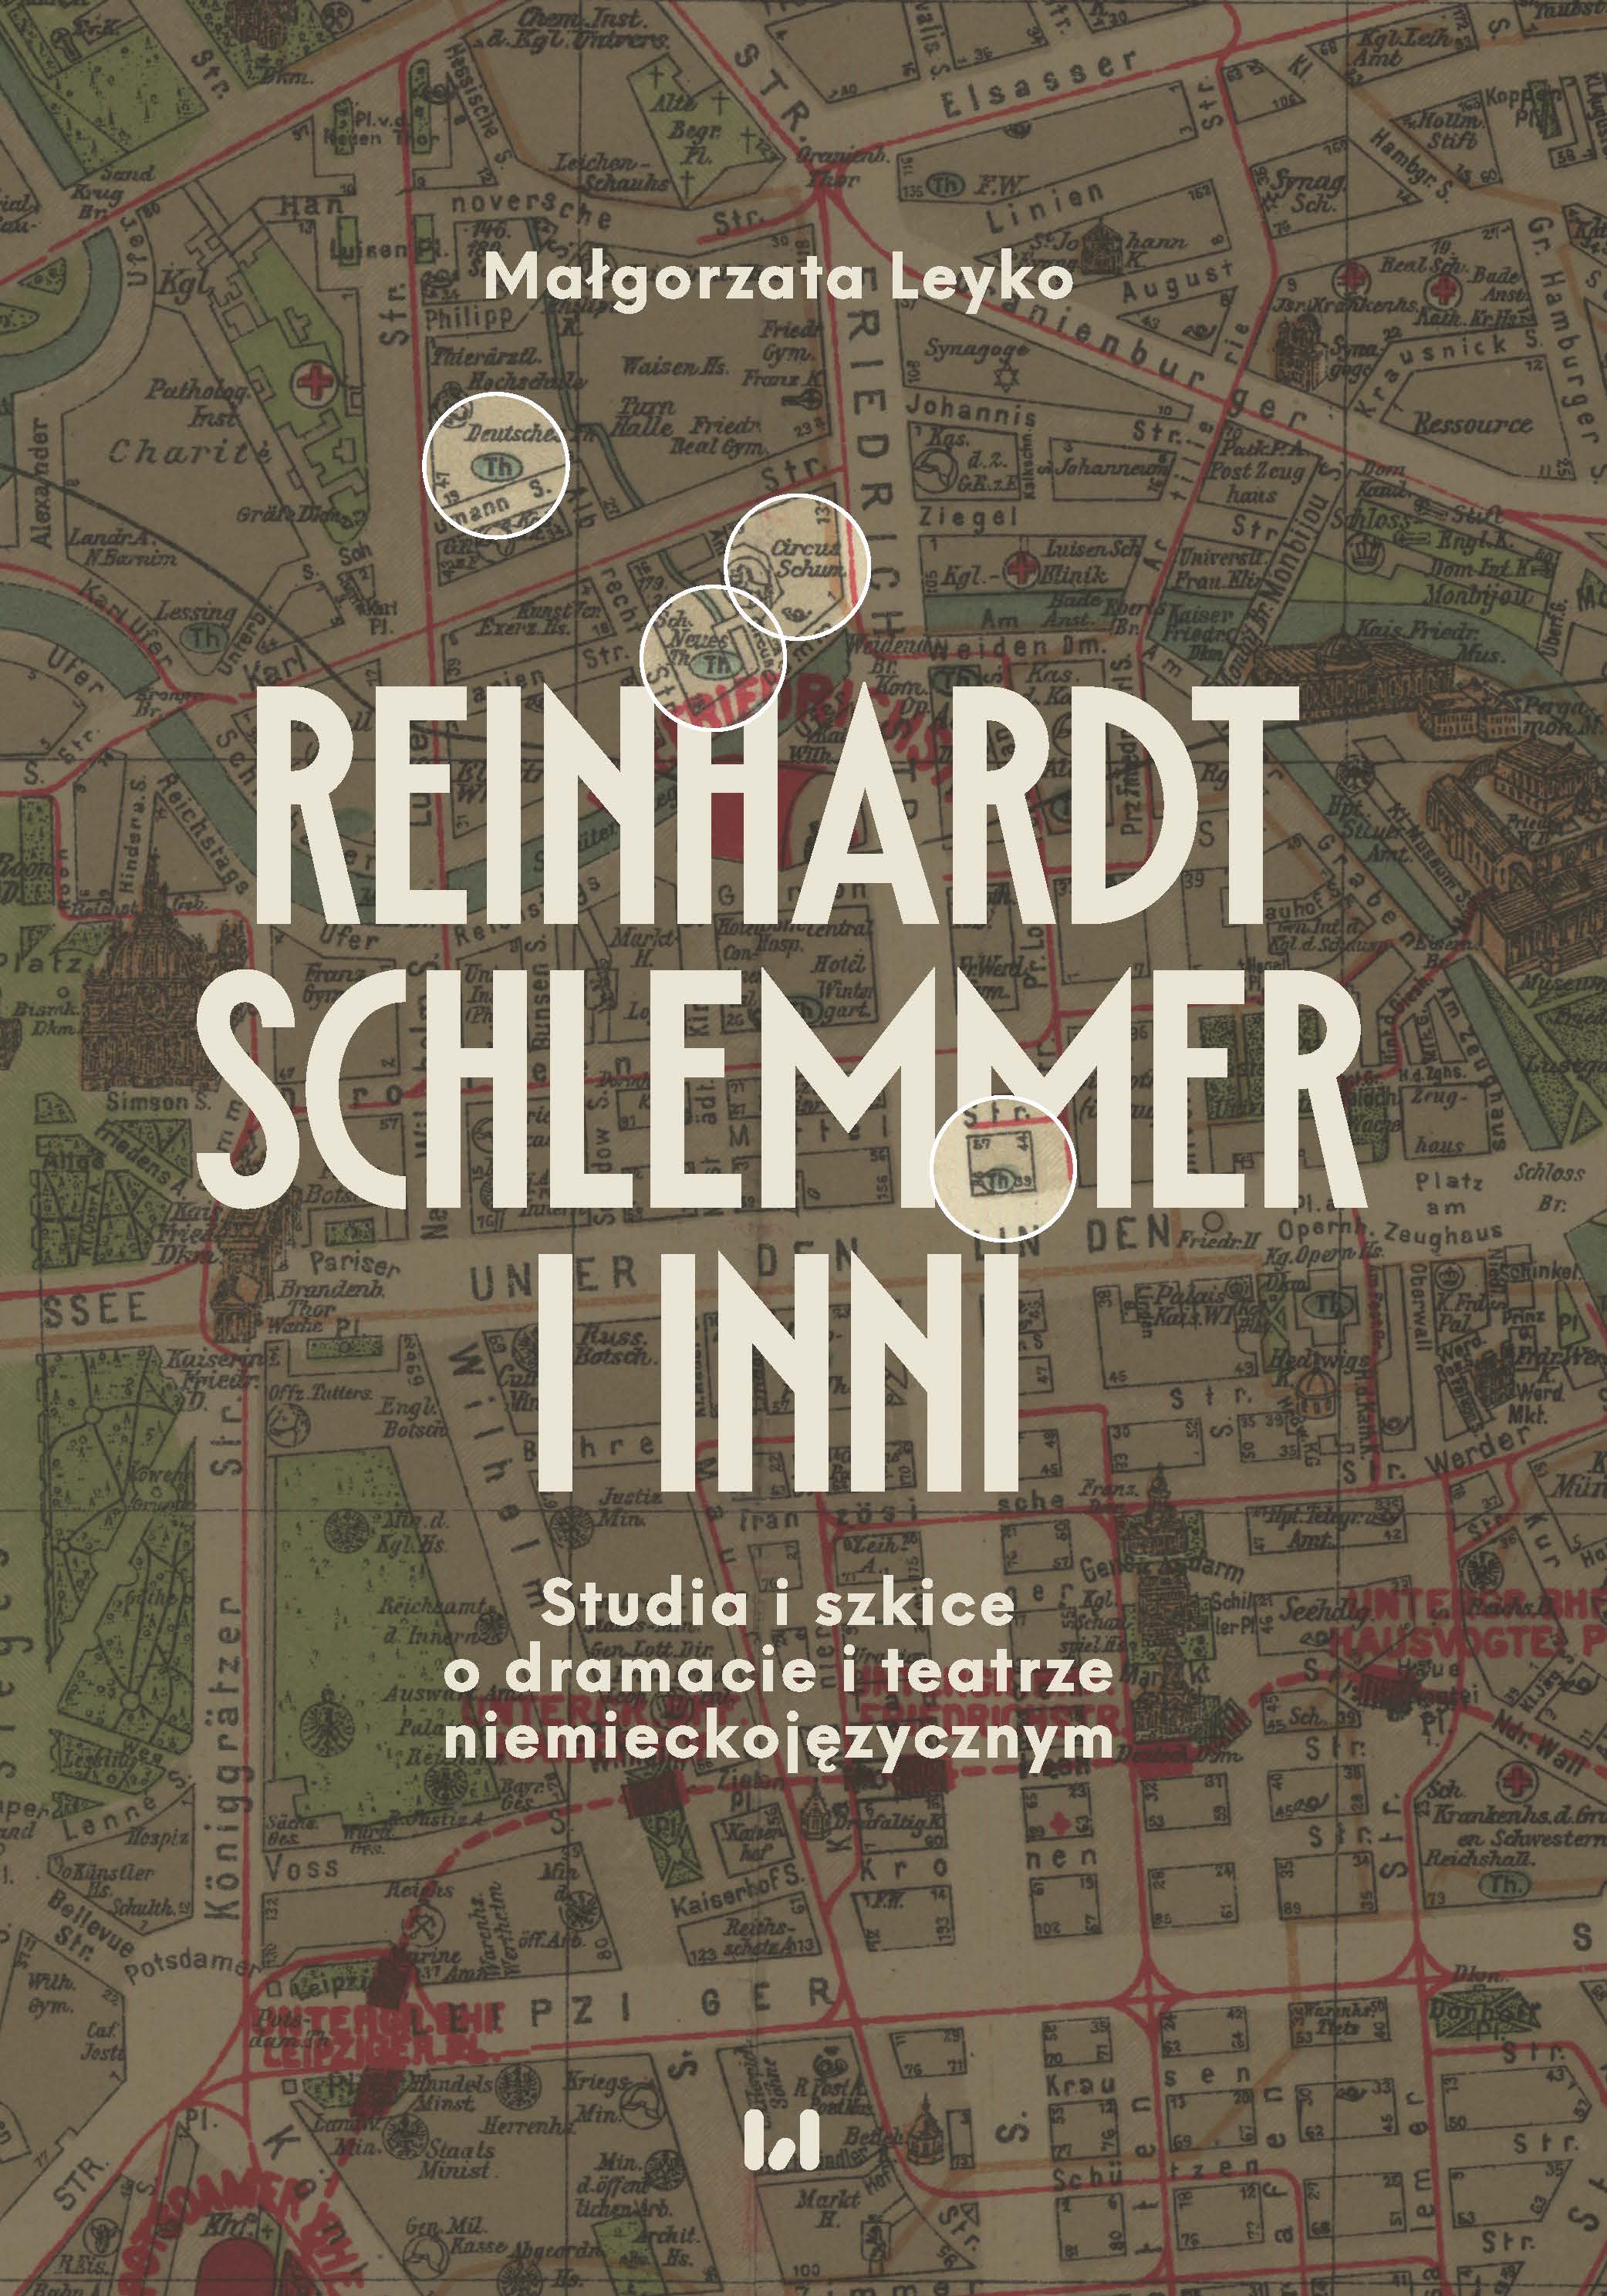 Reinhardt, Schlemmer & others. Studies and sketches on German-language drama and theatre